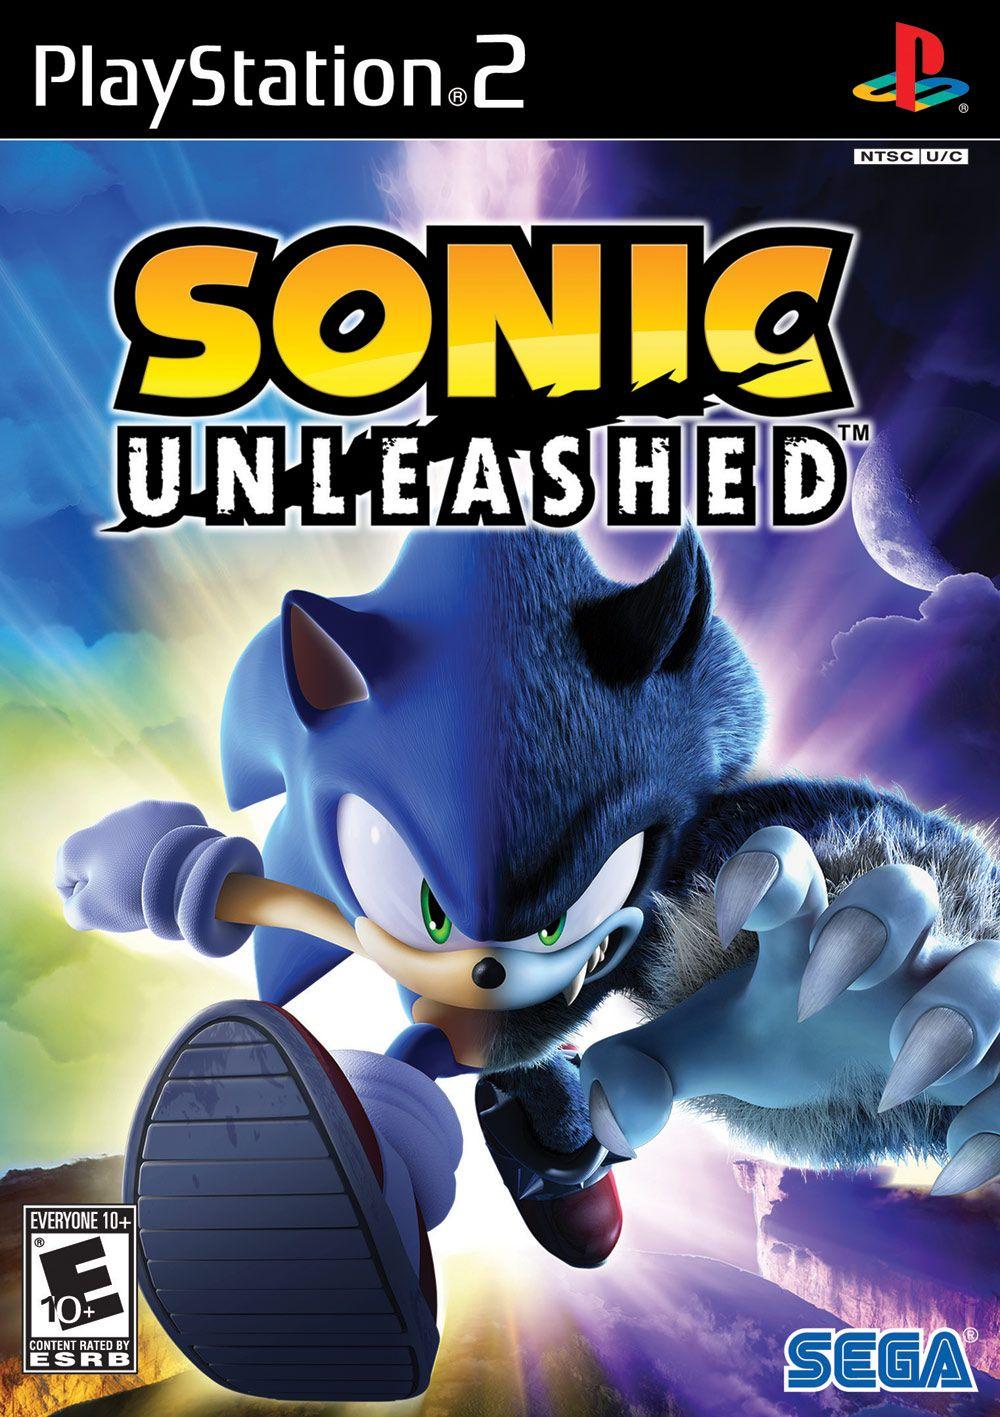 Sonic Unleashed Screenshots, Picture, Wallpaper